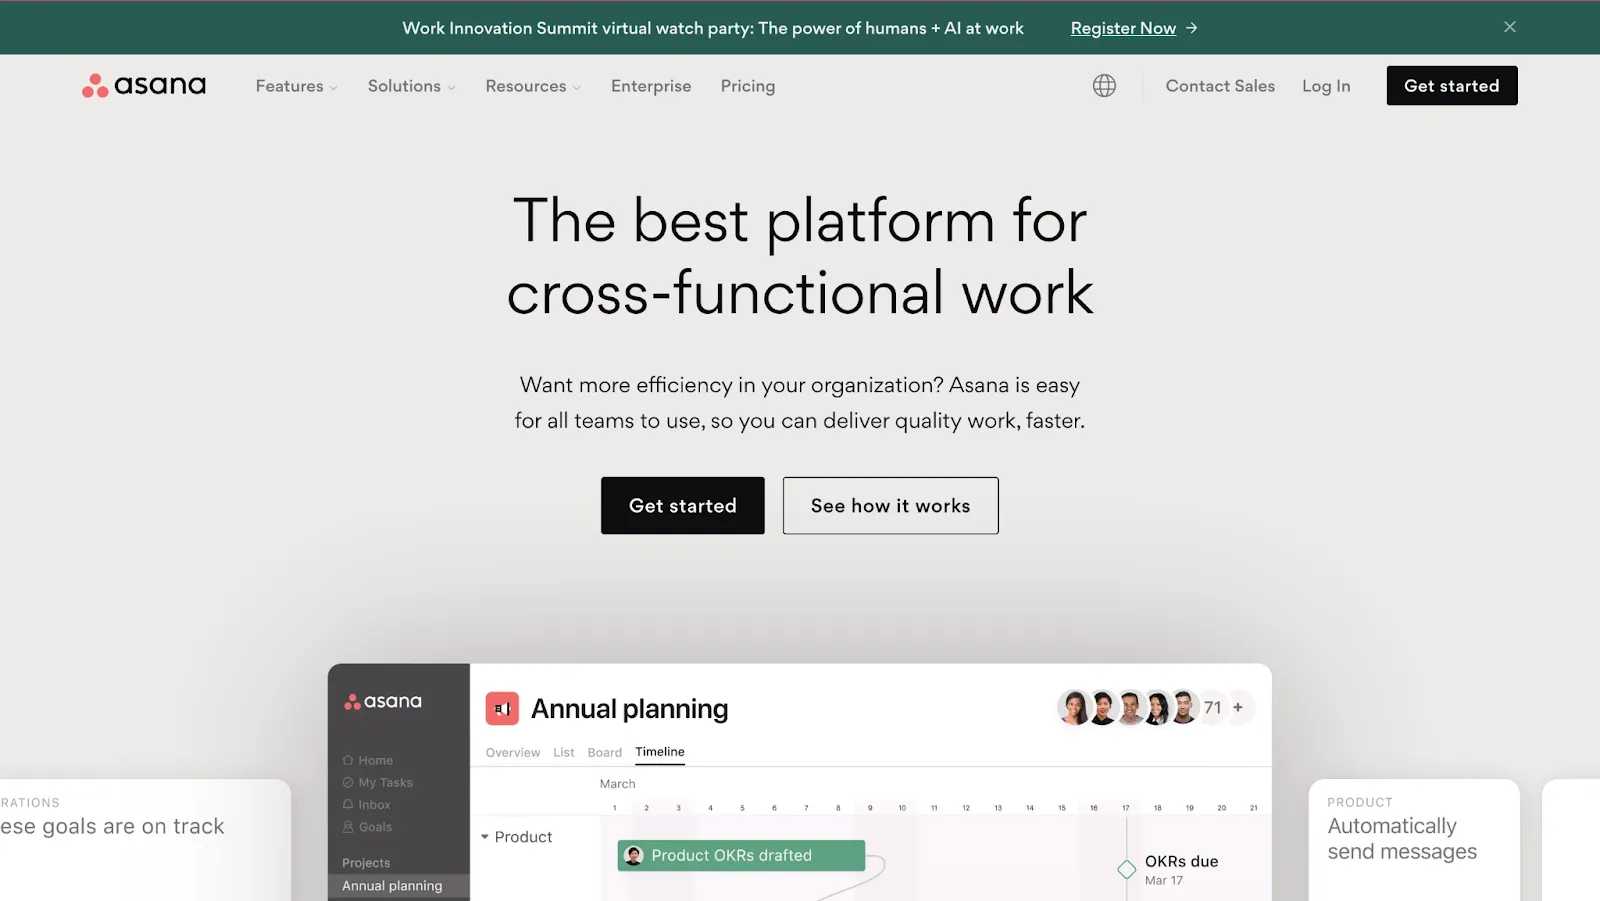 asana home page for collaboration software